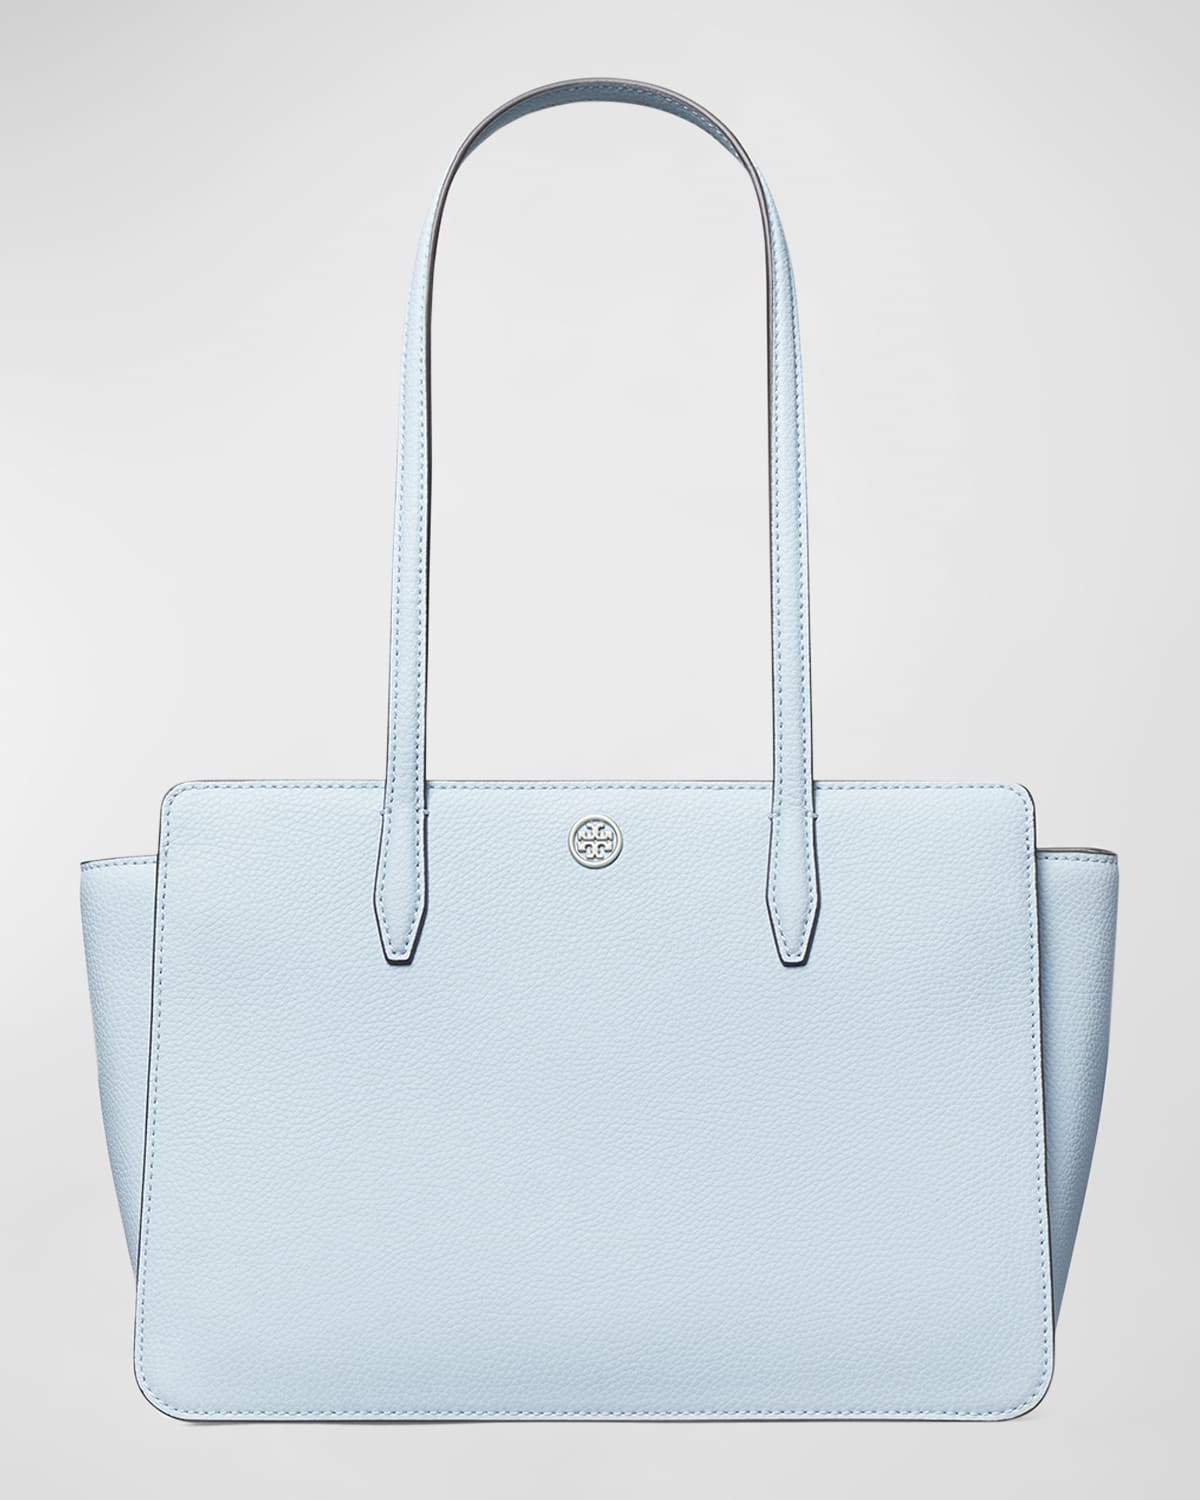 Tory Burch Robinson Small Pebbled Leather Tote Bag In Blue Mist